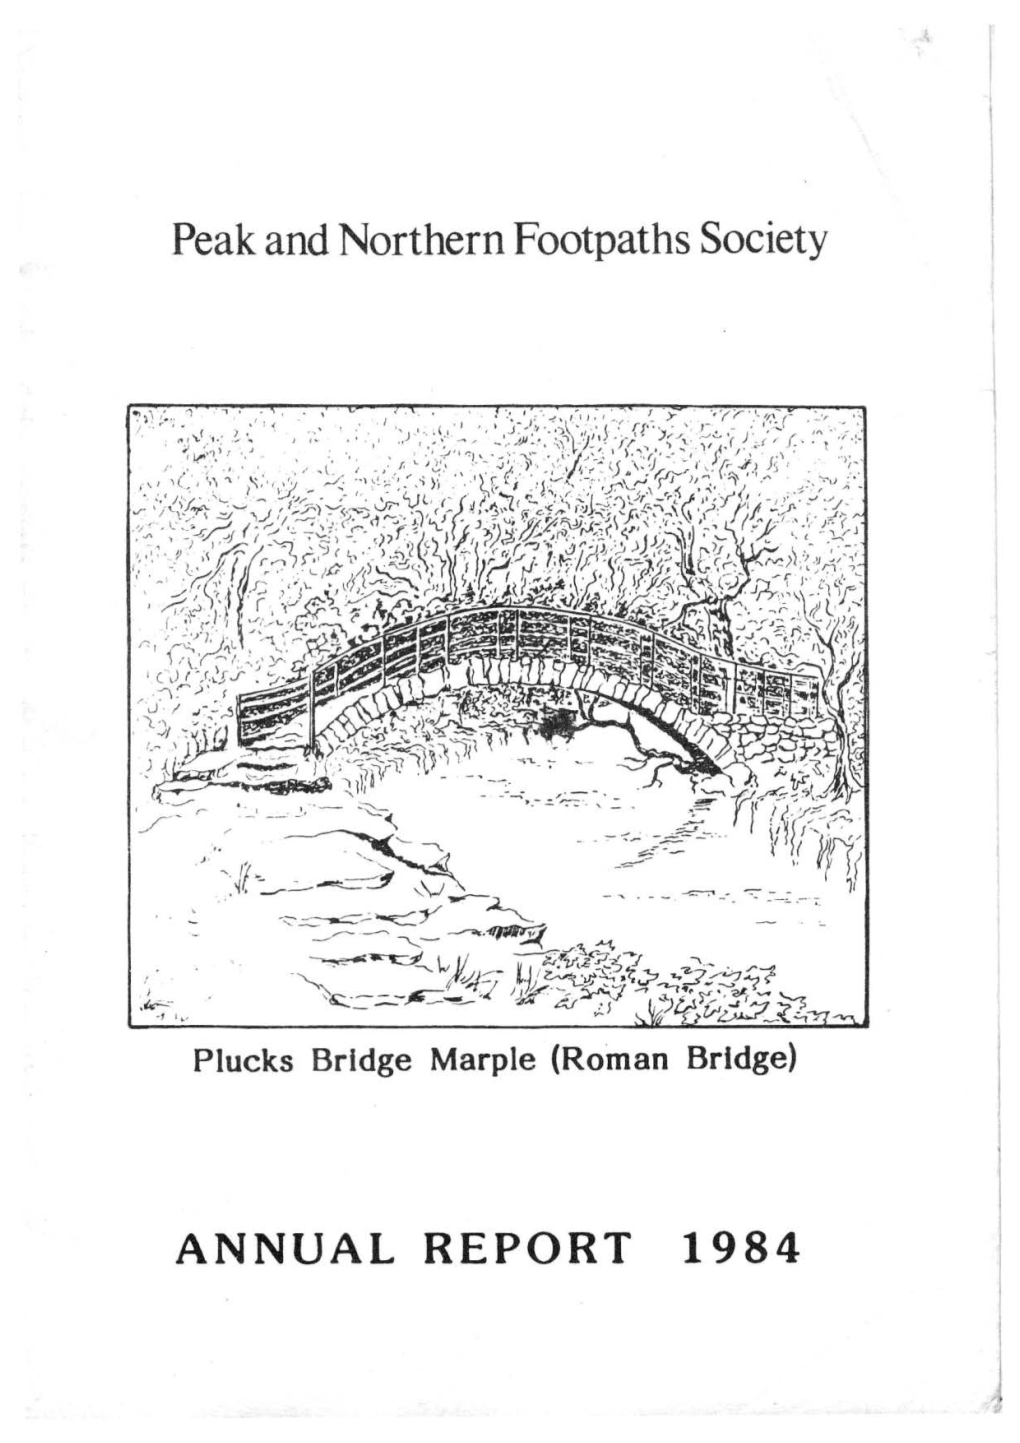 Peak and Northern Footpaths Society ANNUAL REPORT 1984